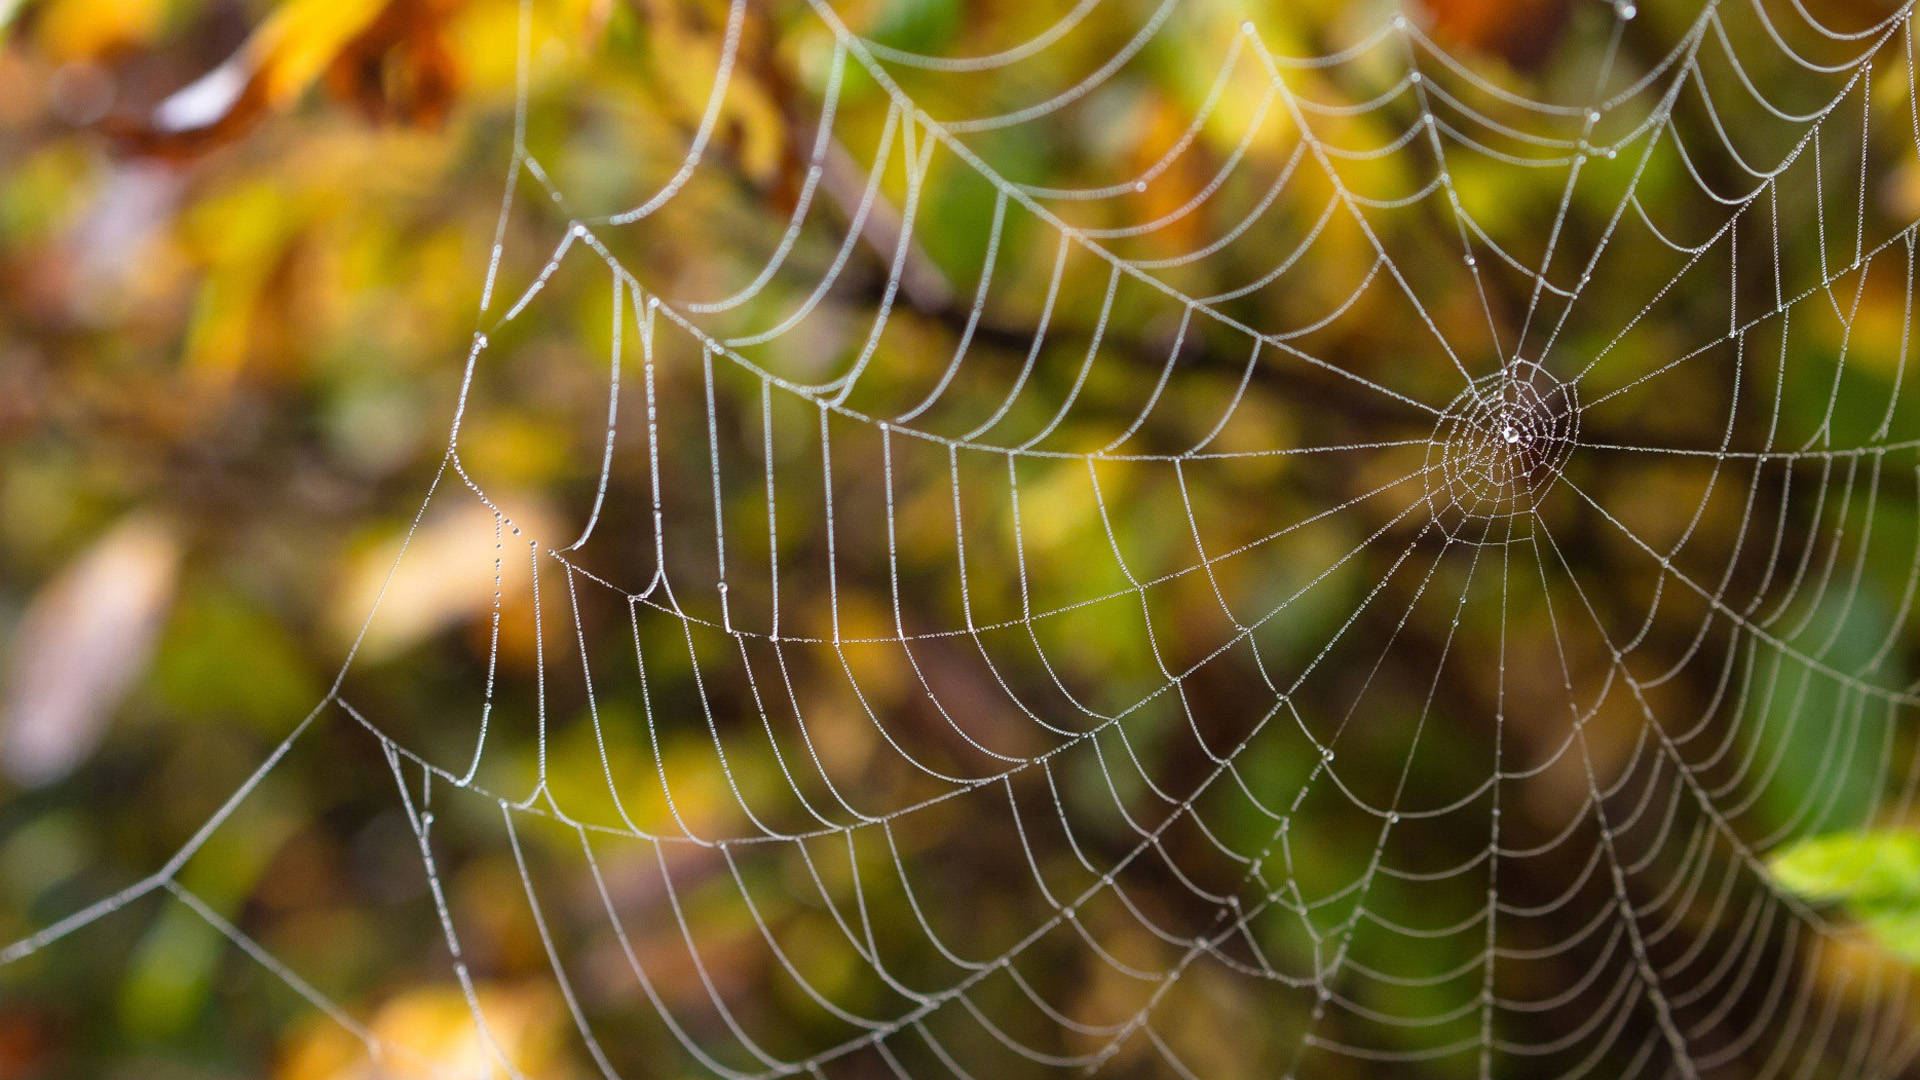 Spider web 28 Insect wallpaper HD wallpaper Background wallpaper